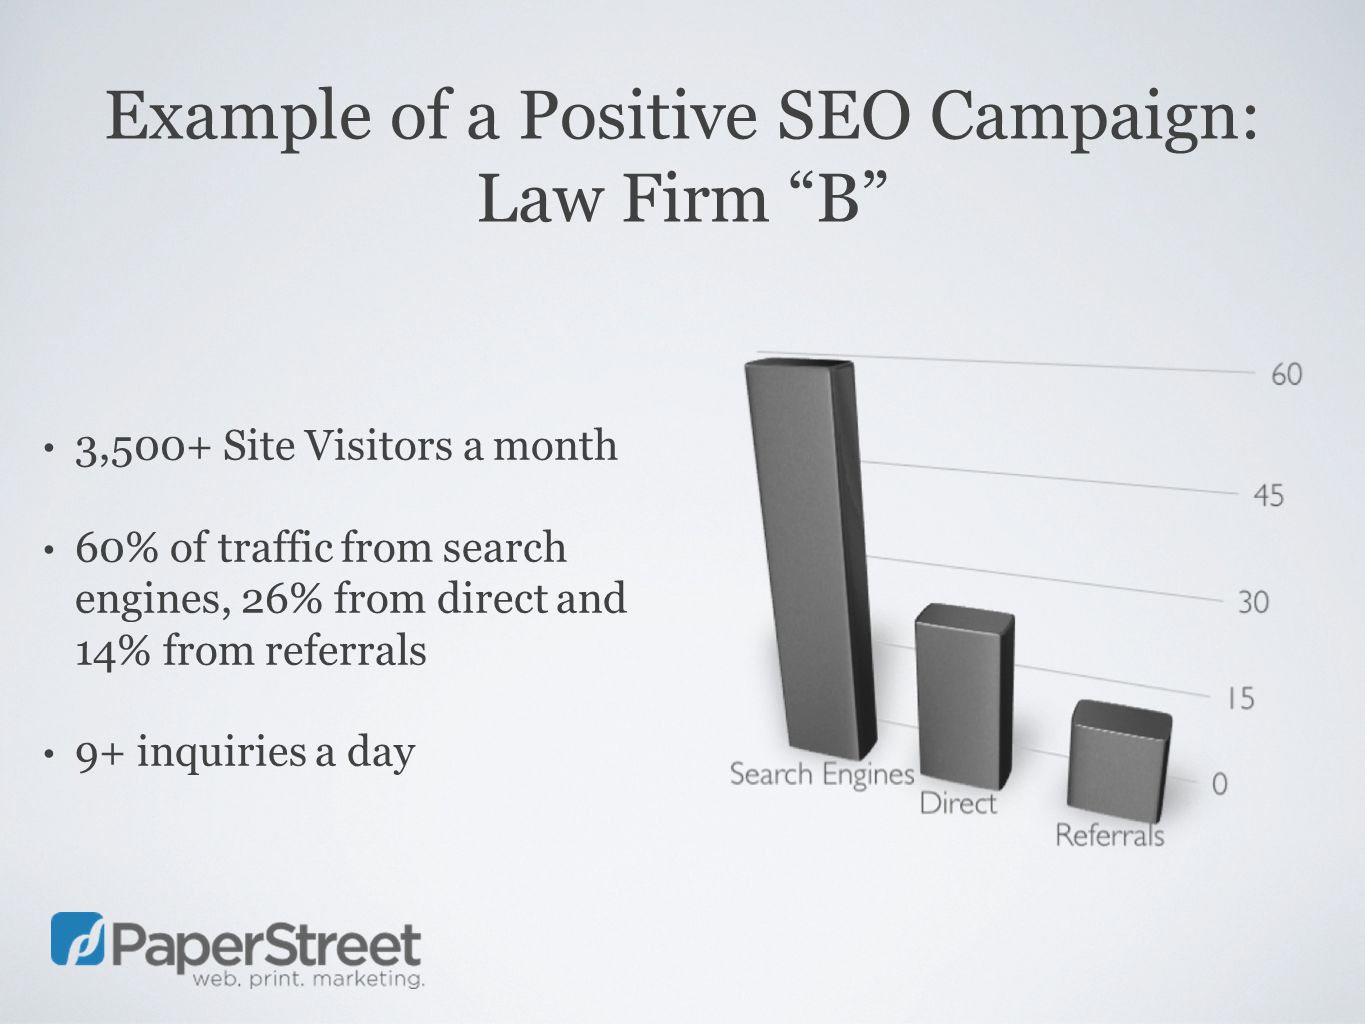 Example of a Positive SEO Campaign: Law Firm B 3,500+ Site Visitors a month 60% of traffic from search engines, 26% from direct and 14% from referrals 9+ inquiries a day